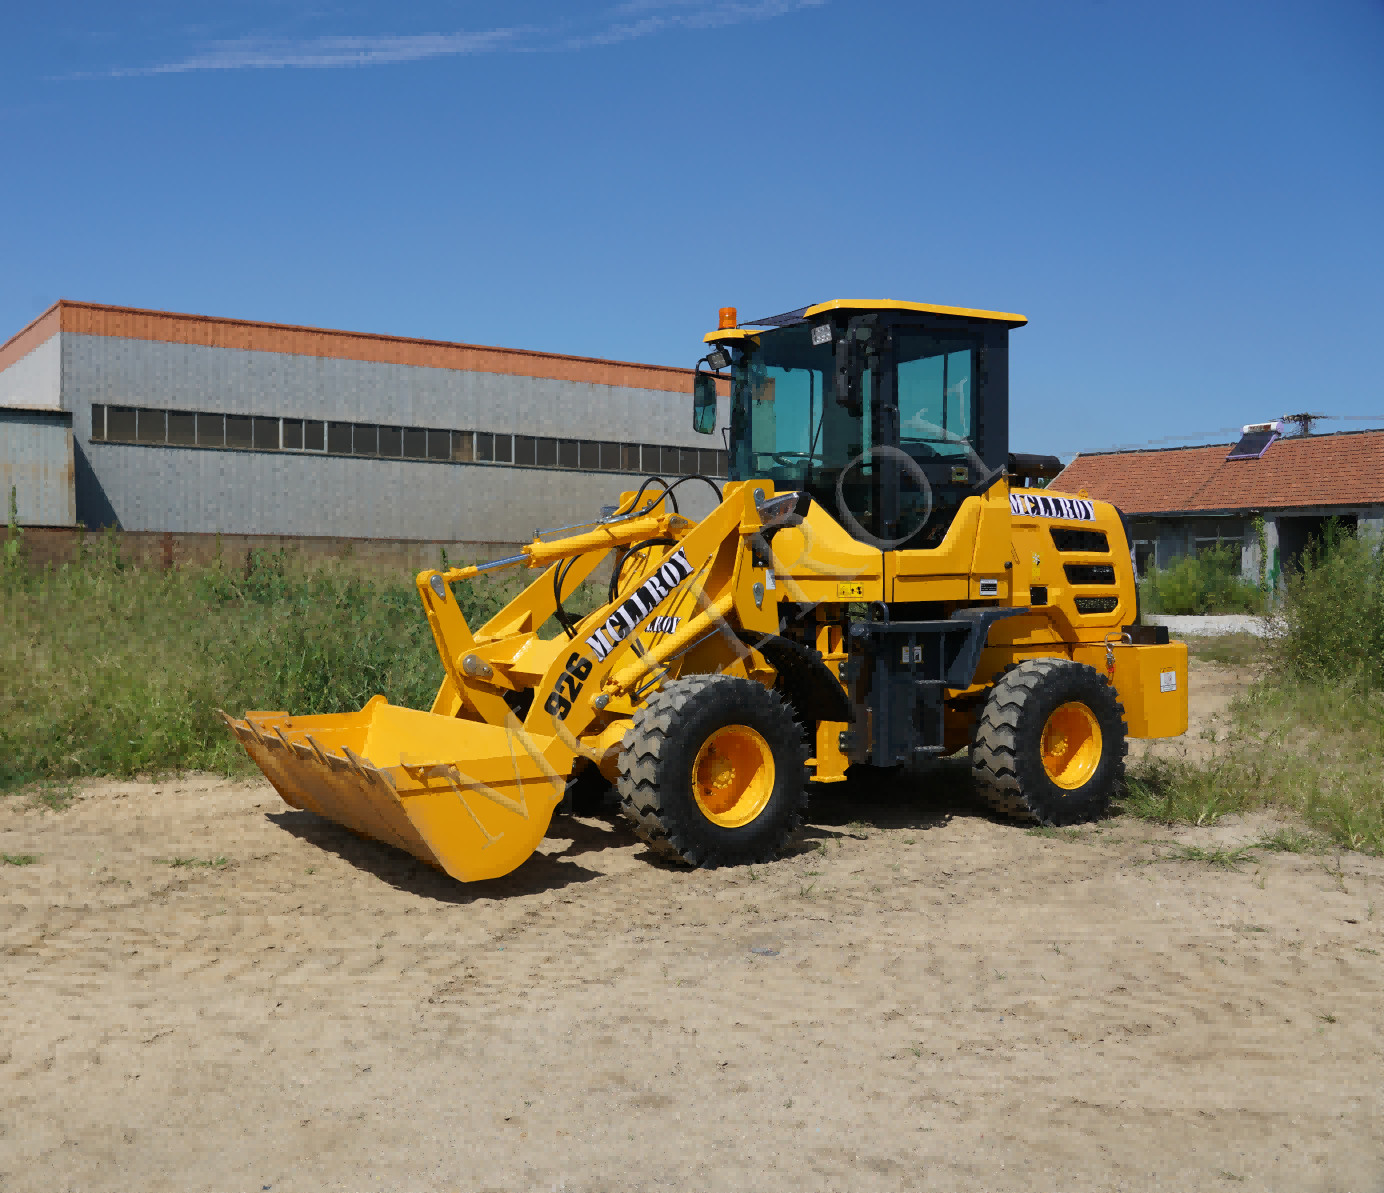 ZL930 ZL926 1.5 Ton Wheel Loader In Construction Agriculture